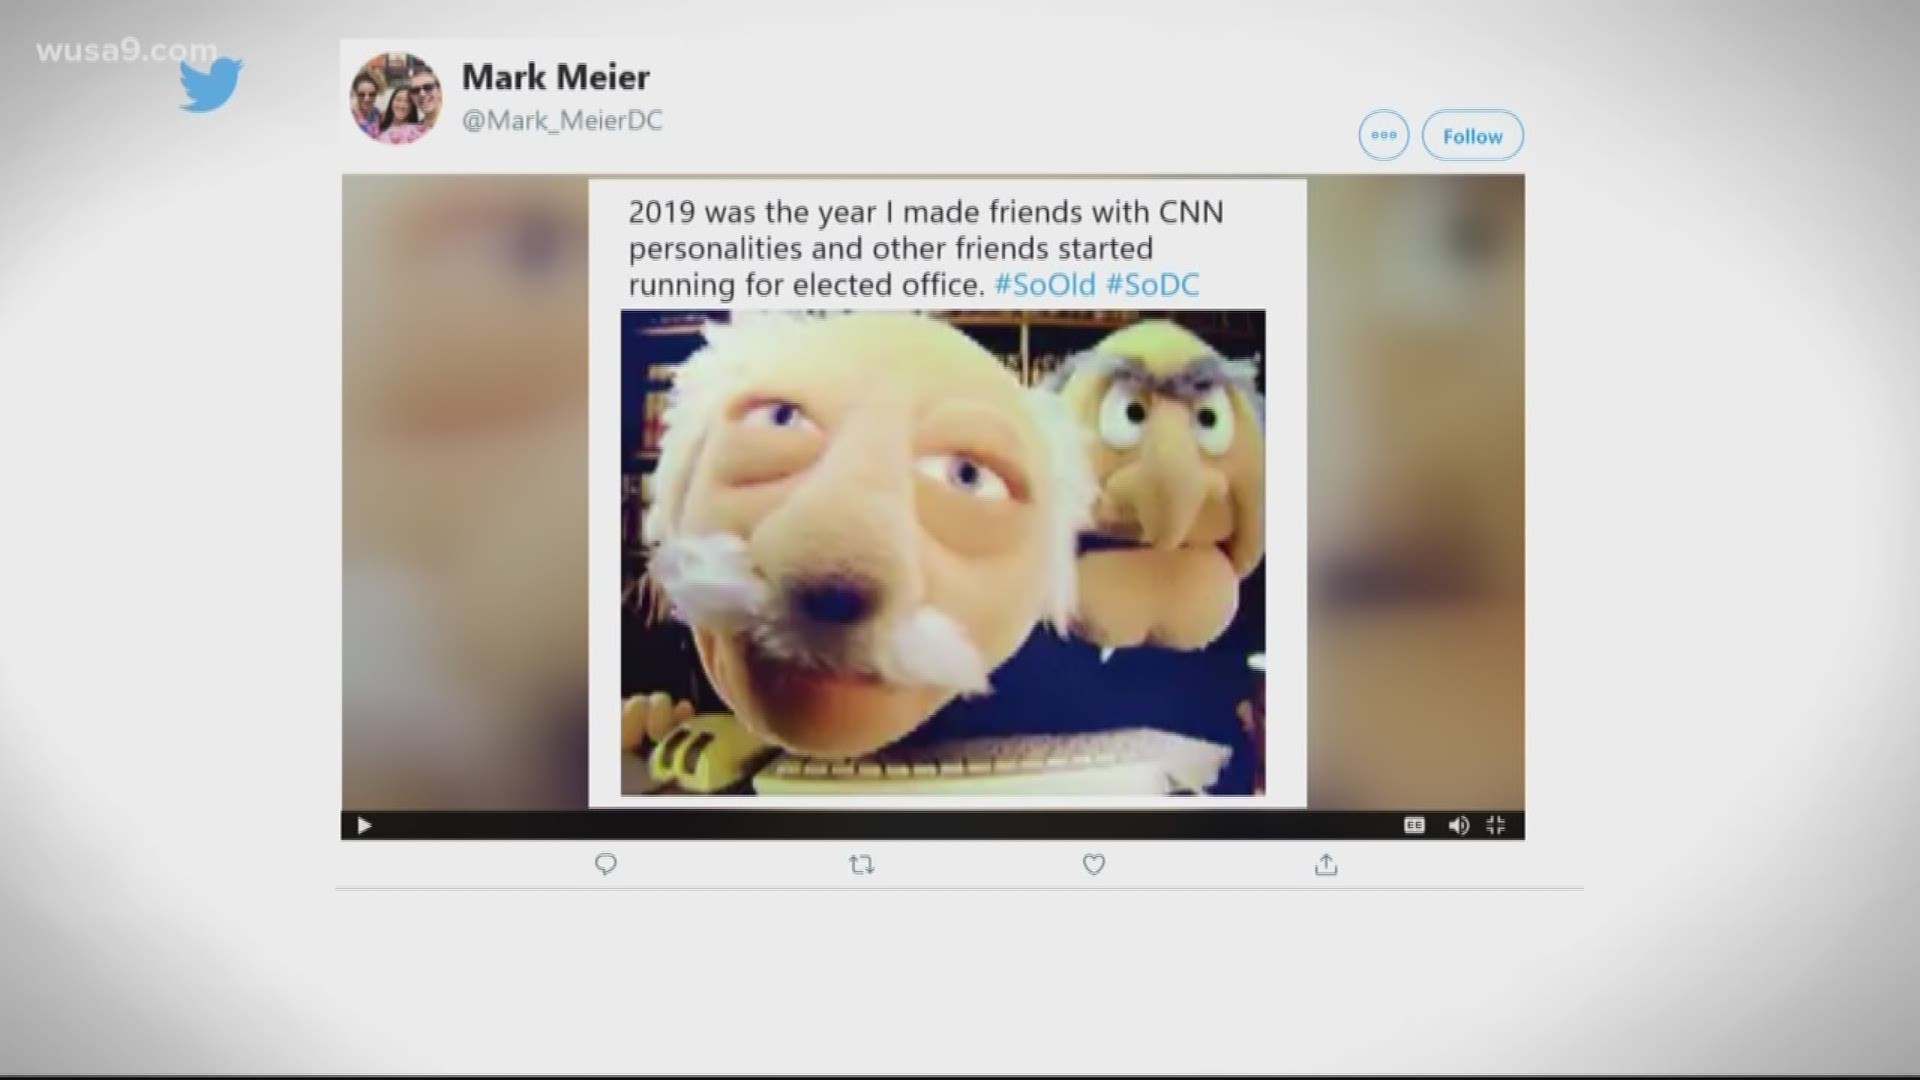 Mark Meier tweeted that his 2019 year was the year he made friends with CNN personalities and other friends that started running for elected office.